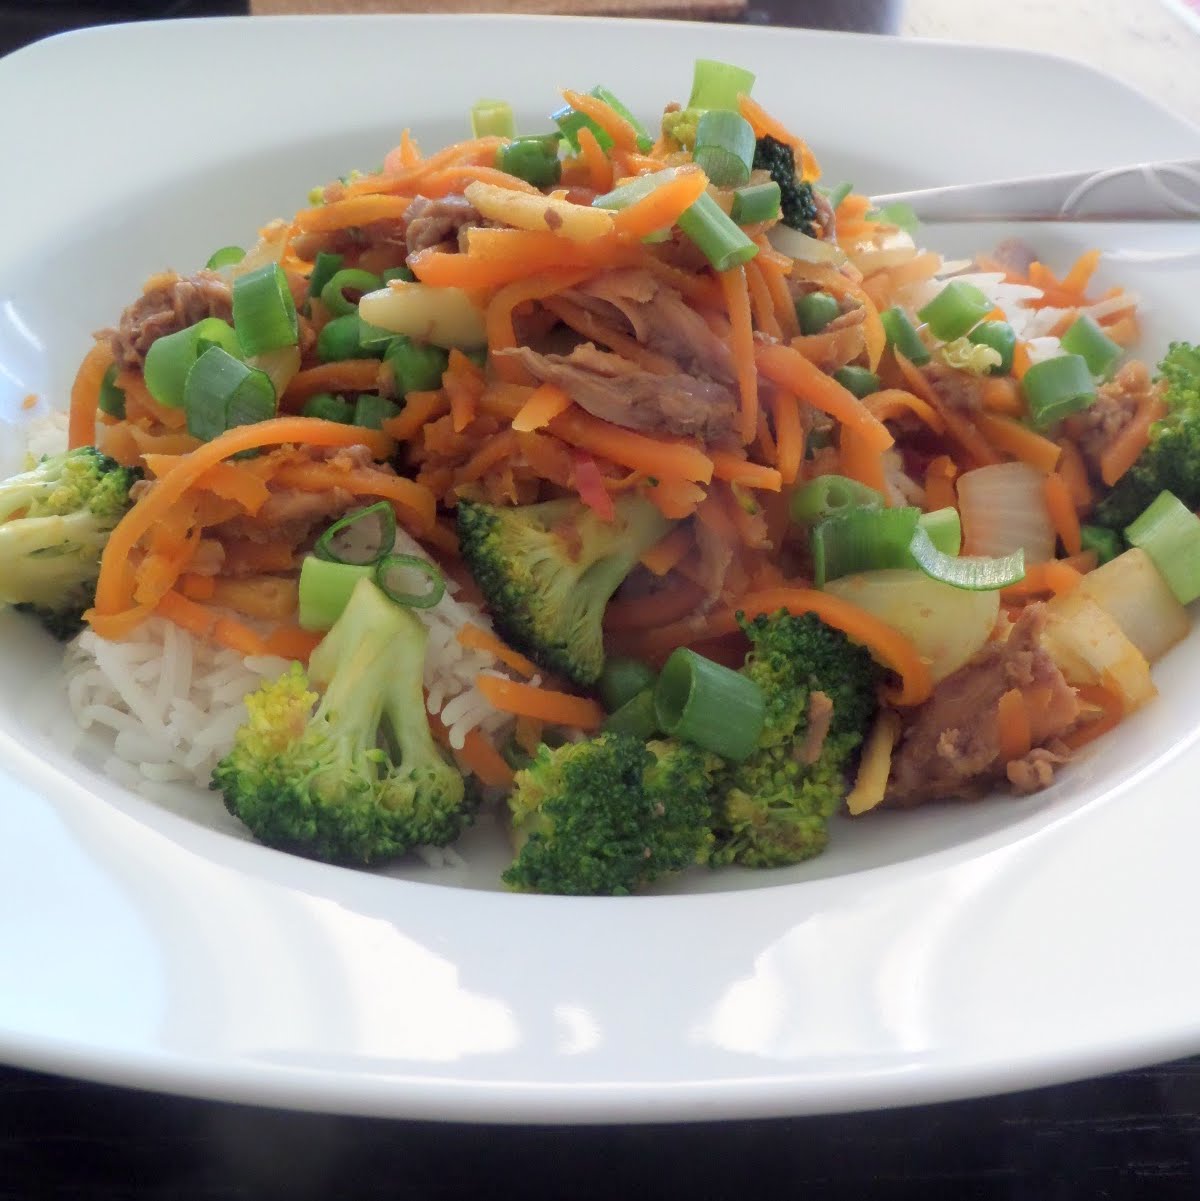 Ginger Chicken Stir Fry:  A simple chicken stir fry with a bite, from fresh ginger.